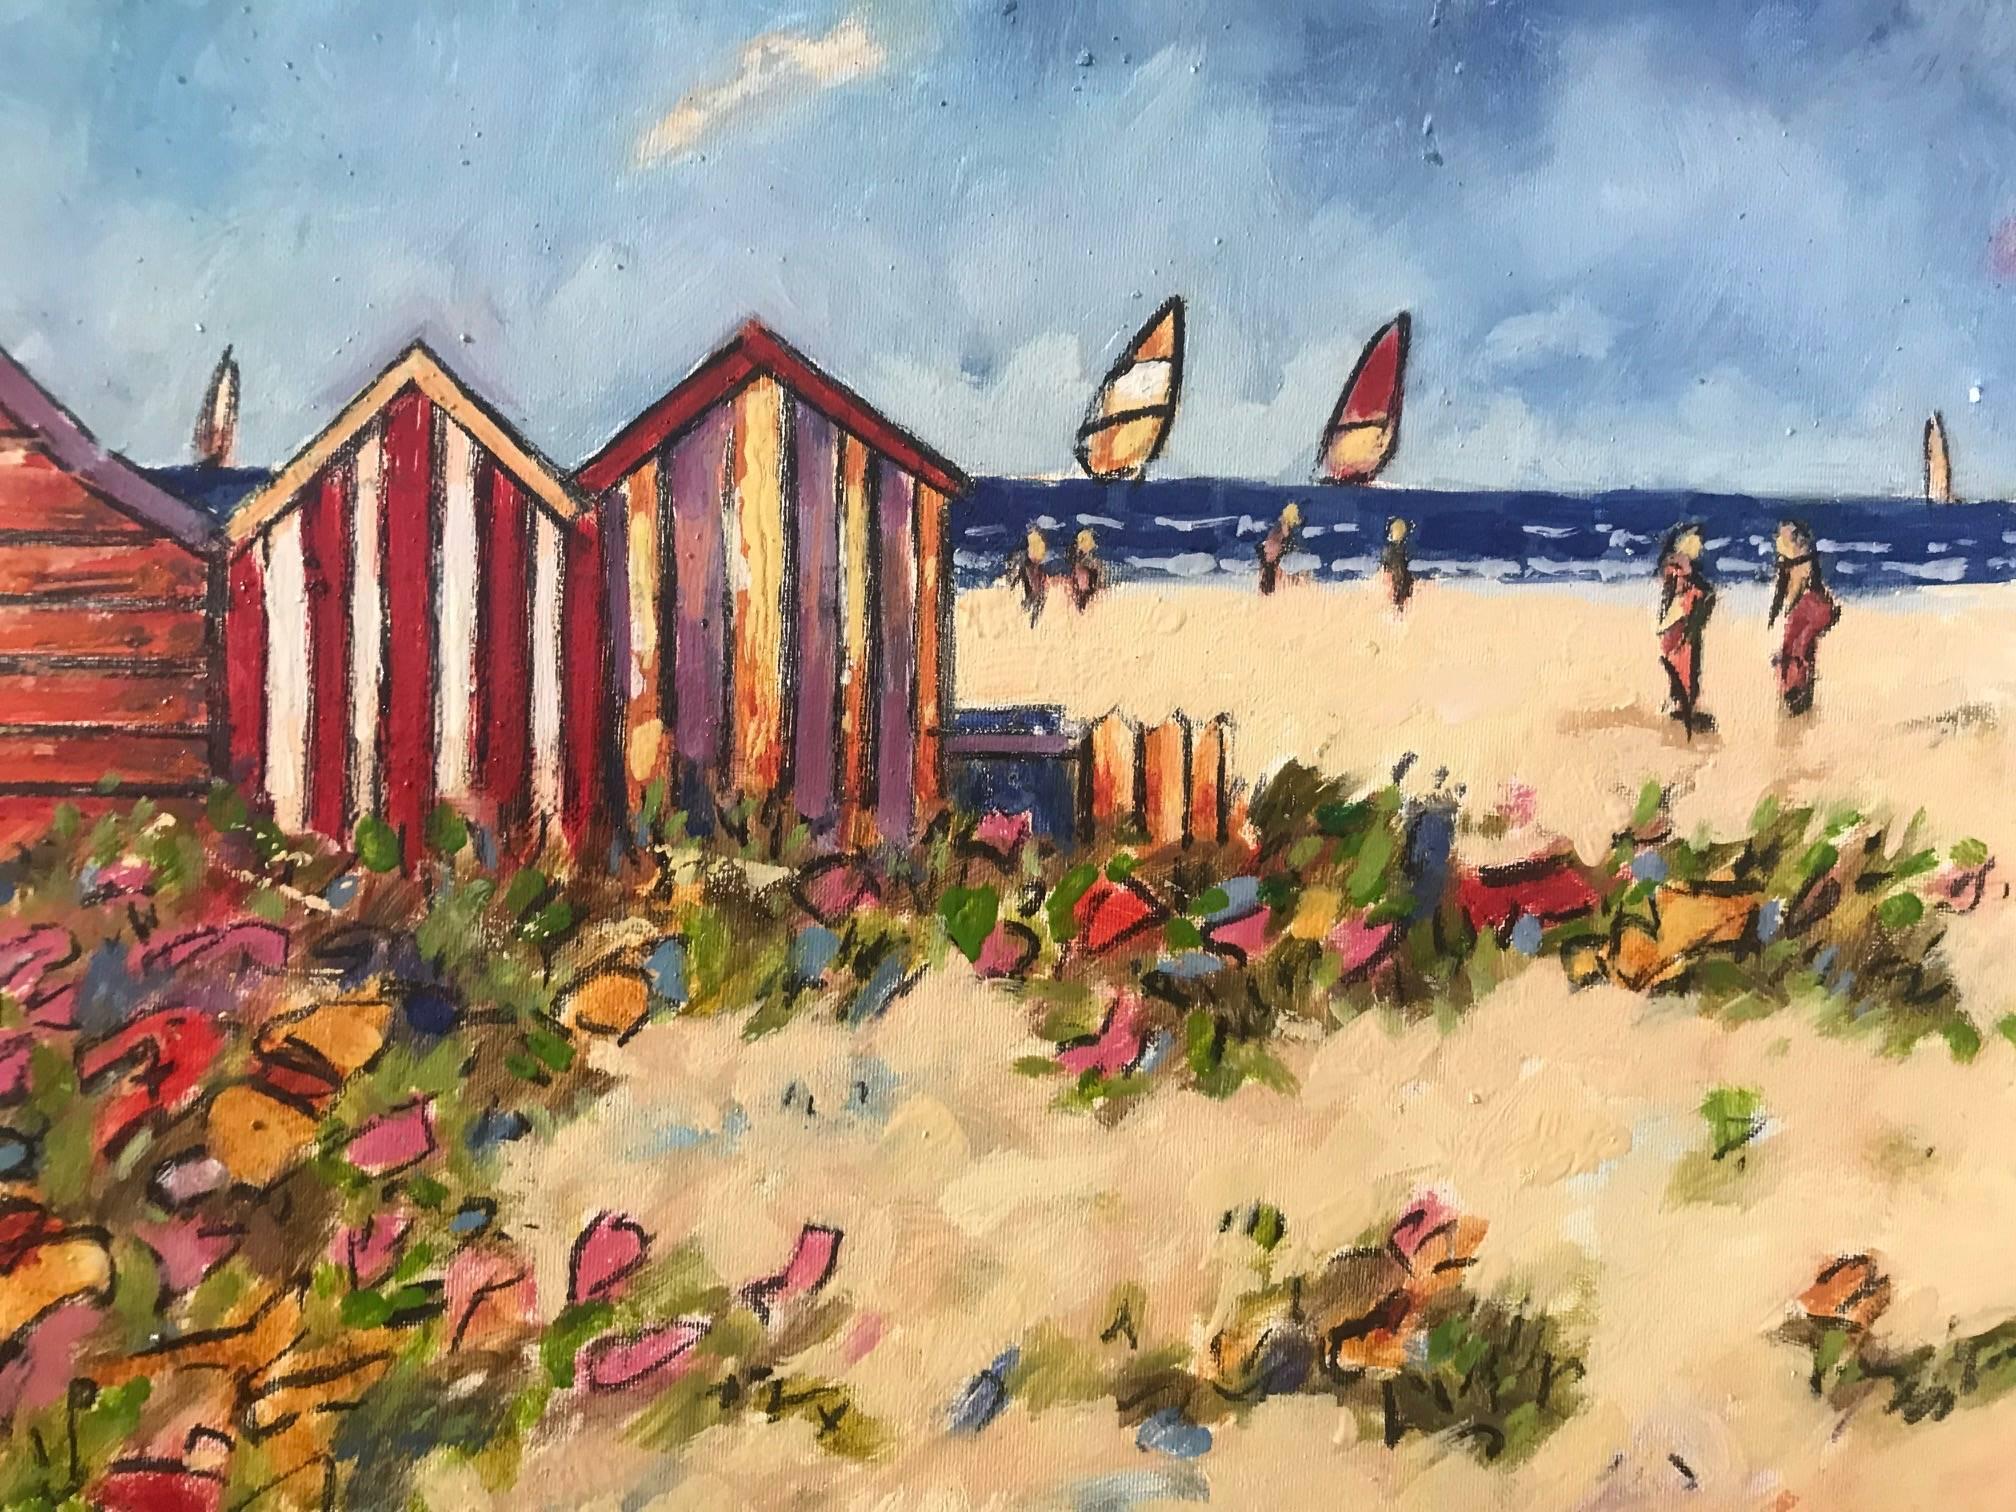 COME ON TO THE BEACH. BEACH HUTS, SEASCAPE - Painting by M. Del Burgo